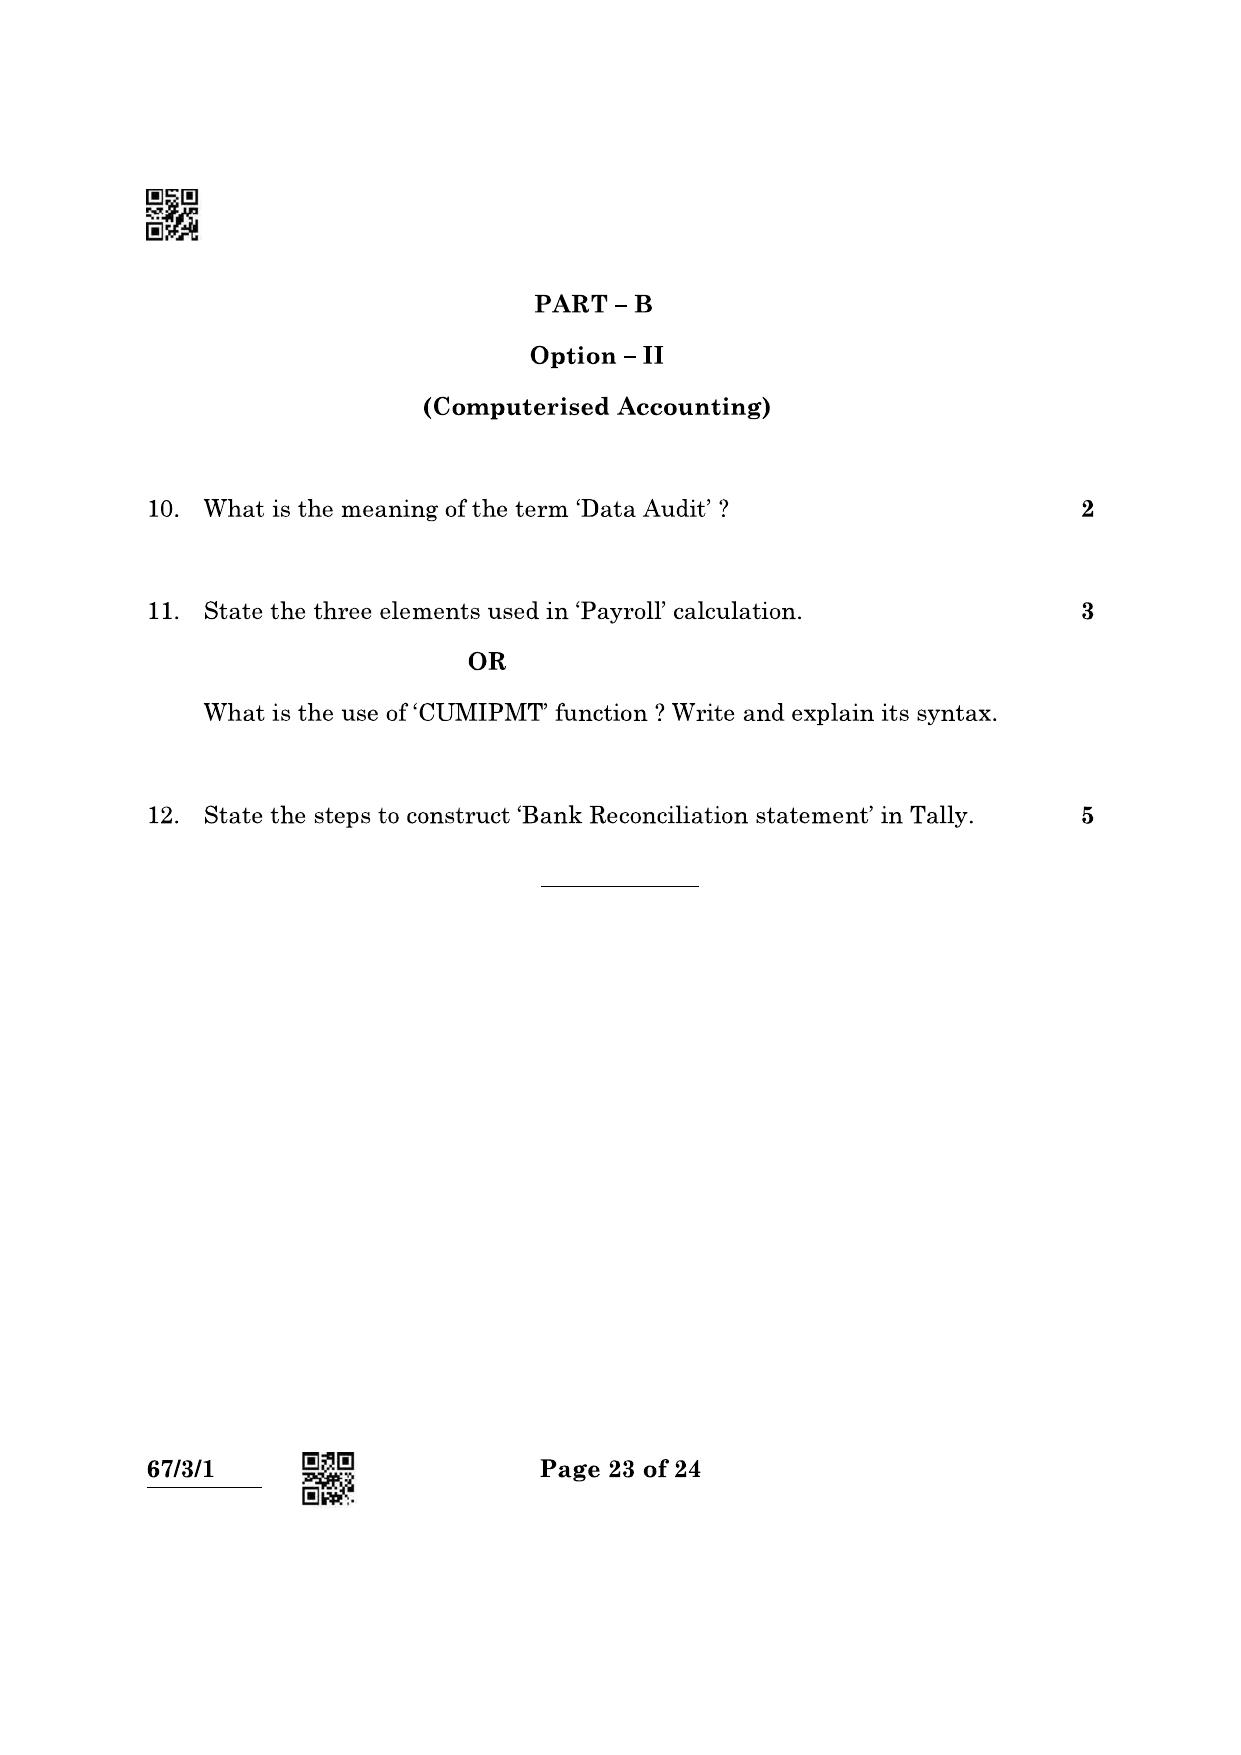 CBSE Class 12 67-3-1 Accountancy 2022 Question Paper - Page 23